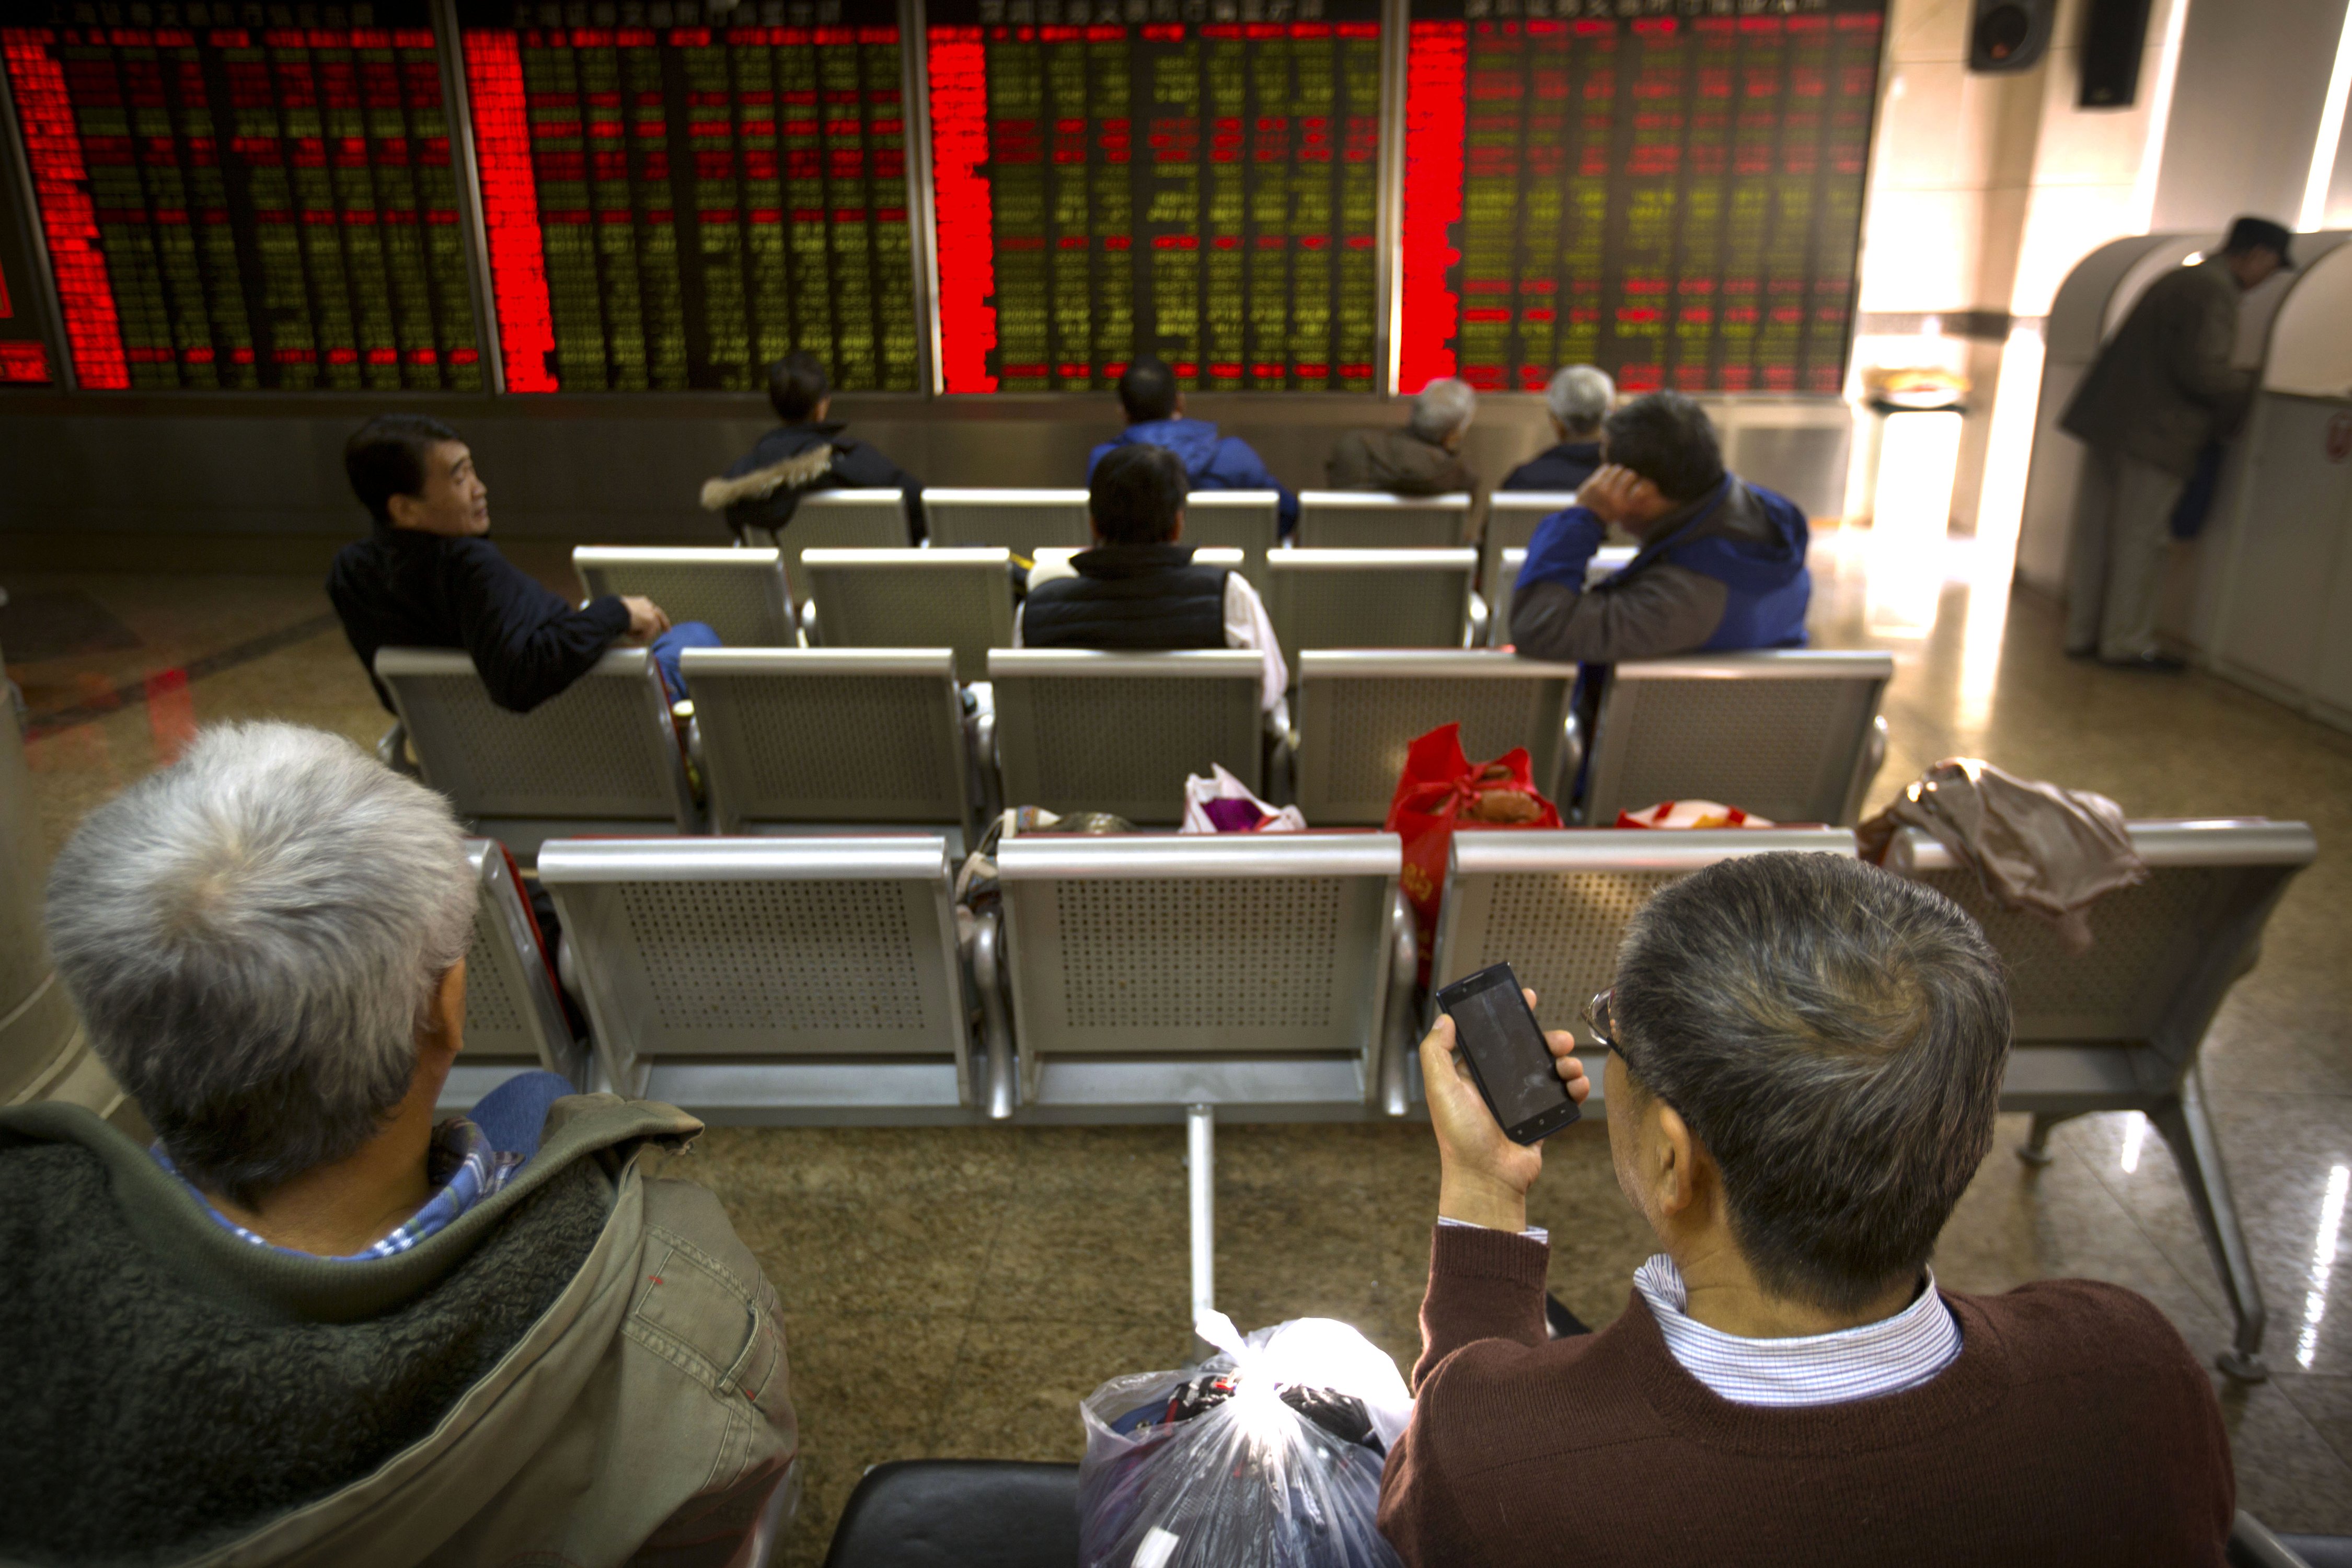 A Chinese investor checks stock prices on his cellphone while others monitor screens at a brokerage house in Beijing, Friday, Dec. 4, 2015. Asian stocks sank Friday, extending a sell-off in world markets after Europe's central bank unveiled plans to stimulate the continent's ailing economy that fell short of investor expectations. (AP Photo/Mark Schiefelbein)